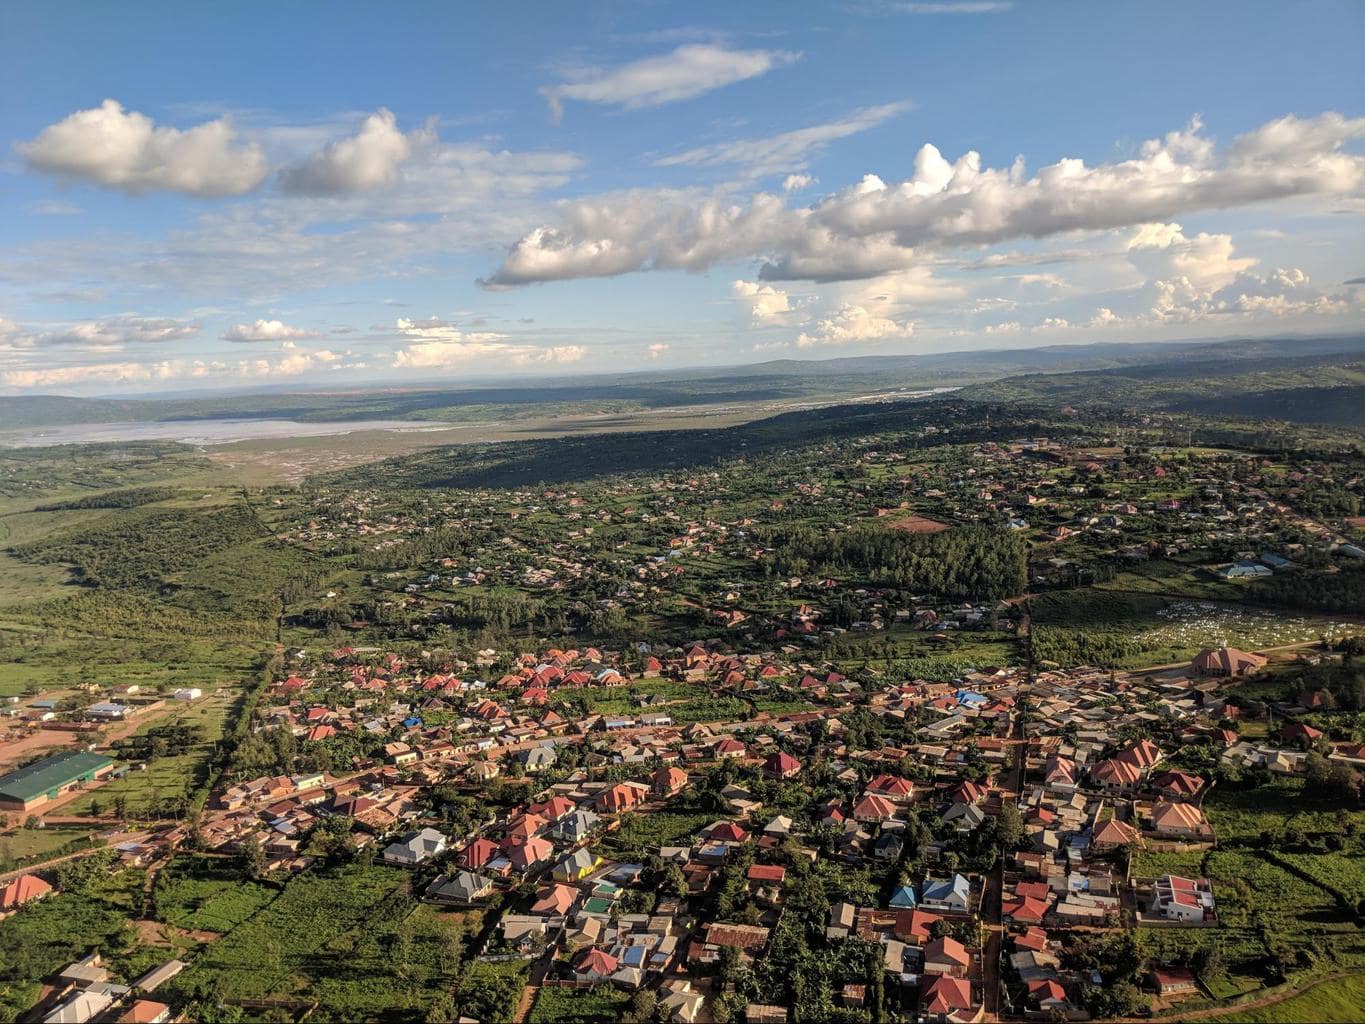 Rwanda from above on the approach to landing in Kigali